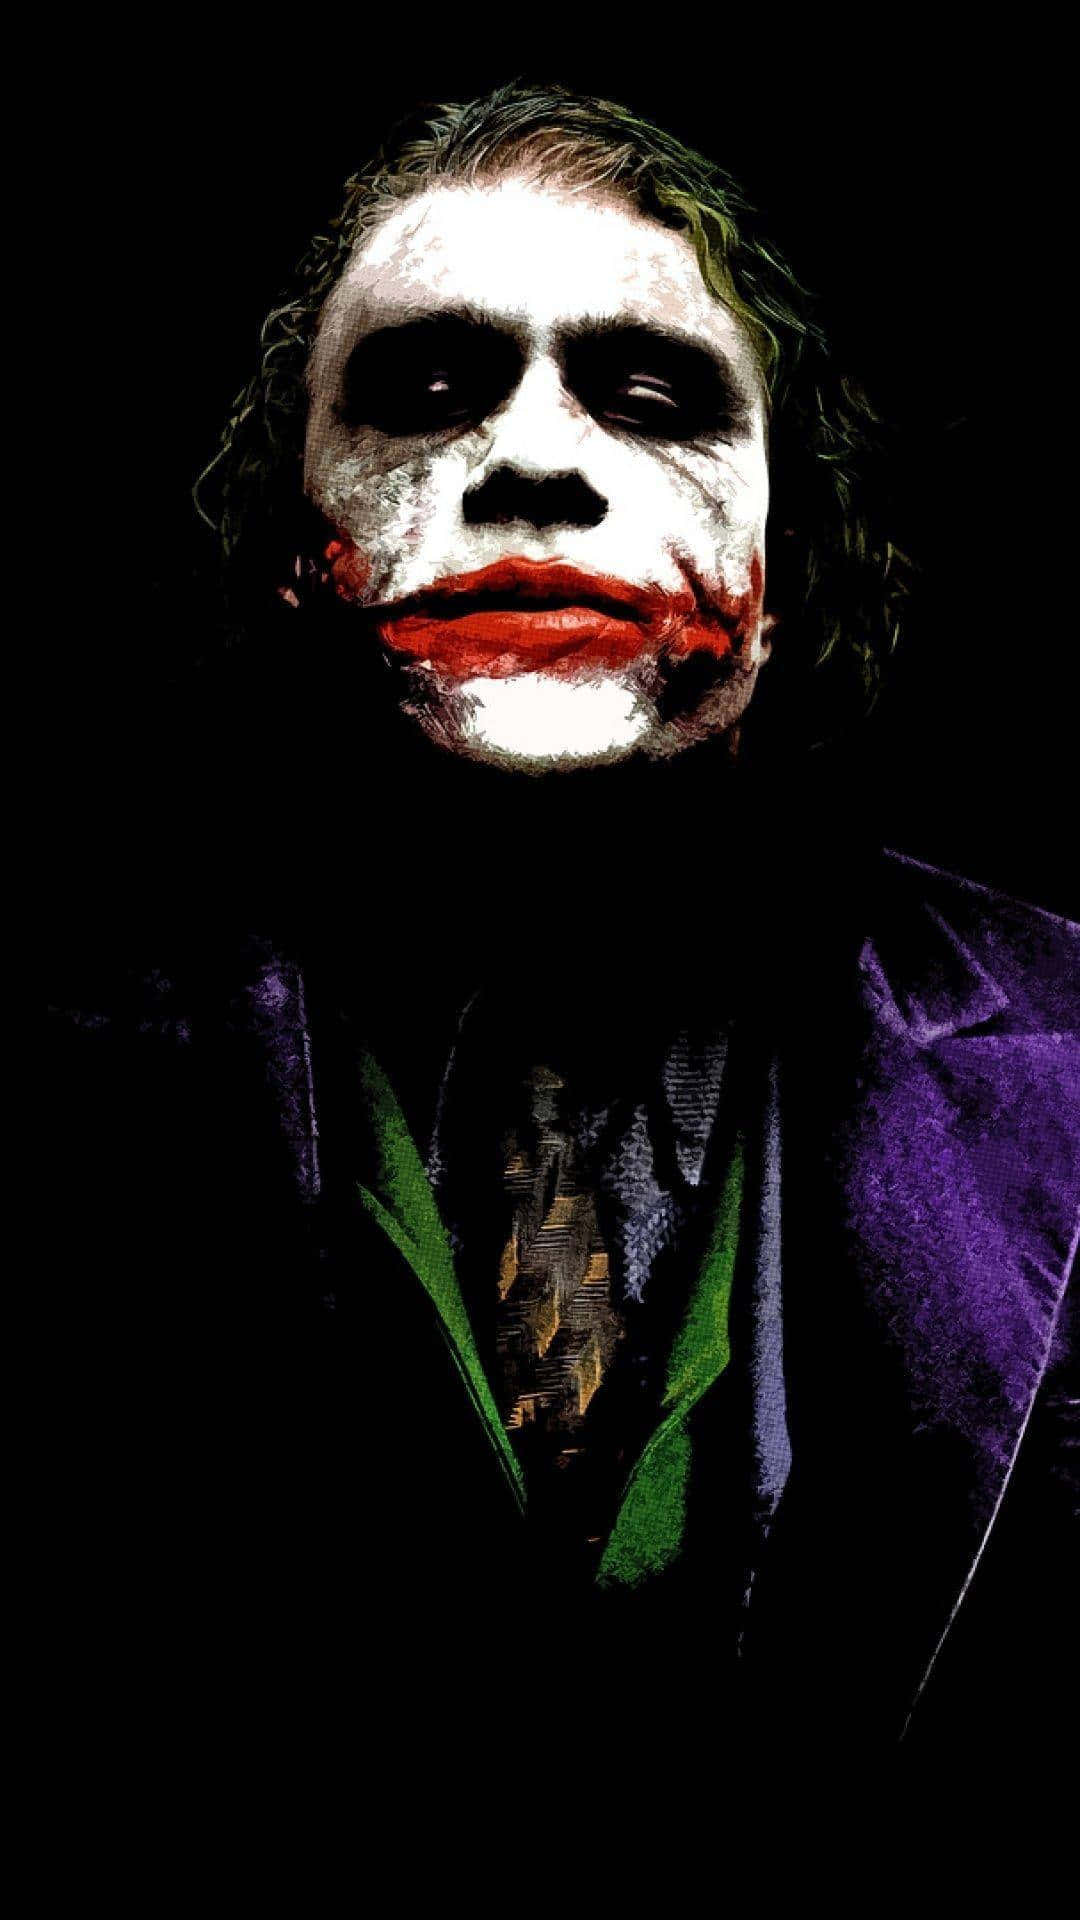 Joker Making A Serious Face With His Chin Up Wallpaper